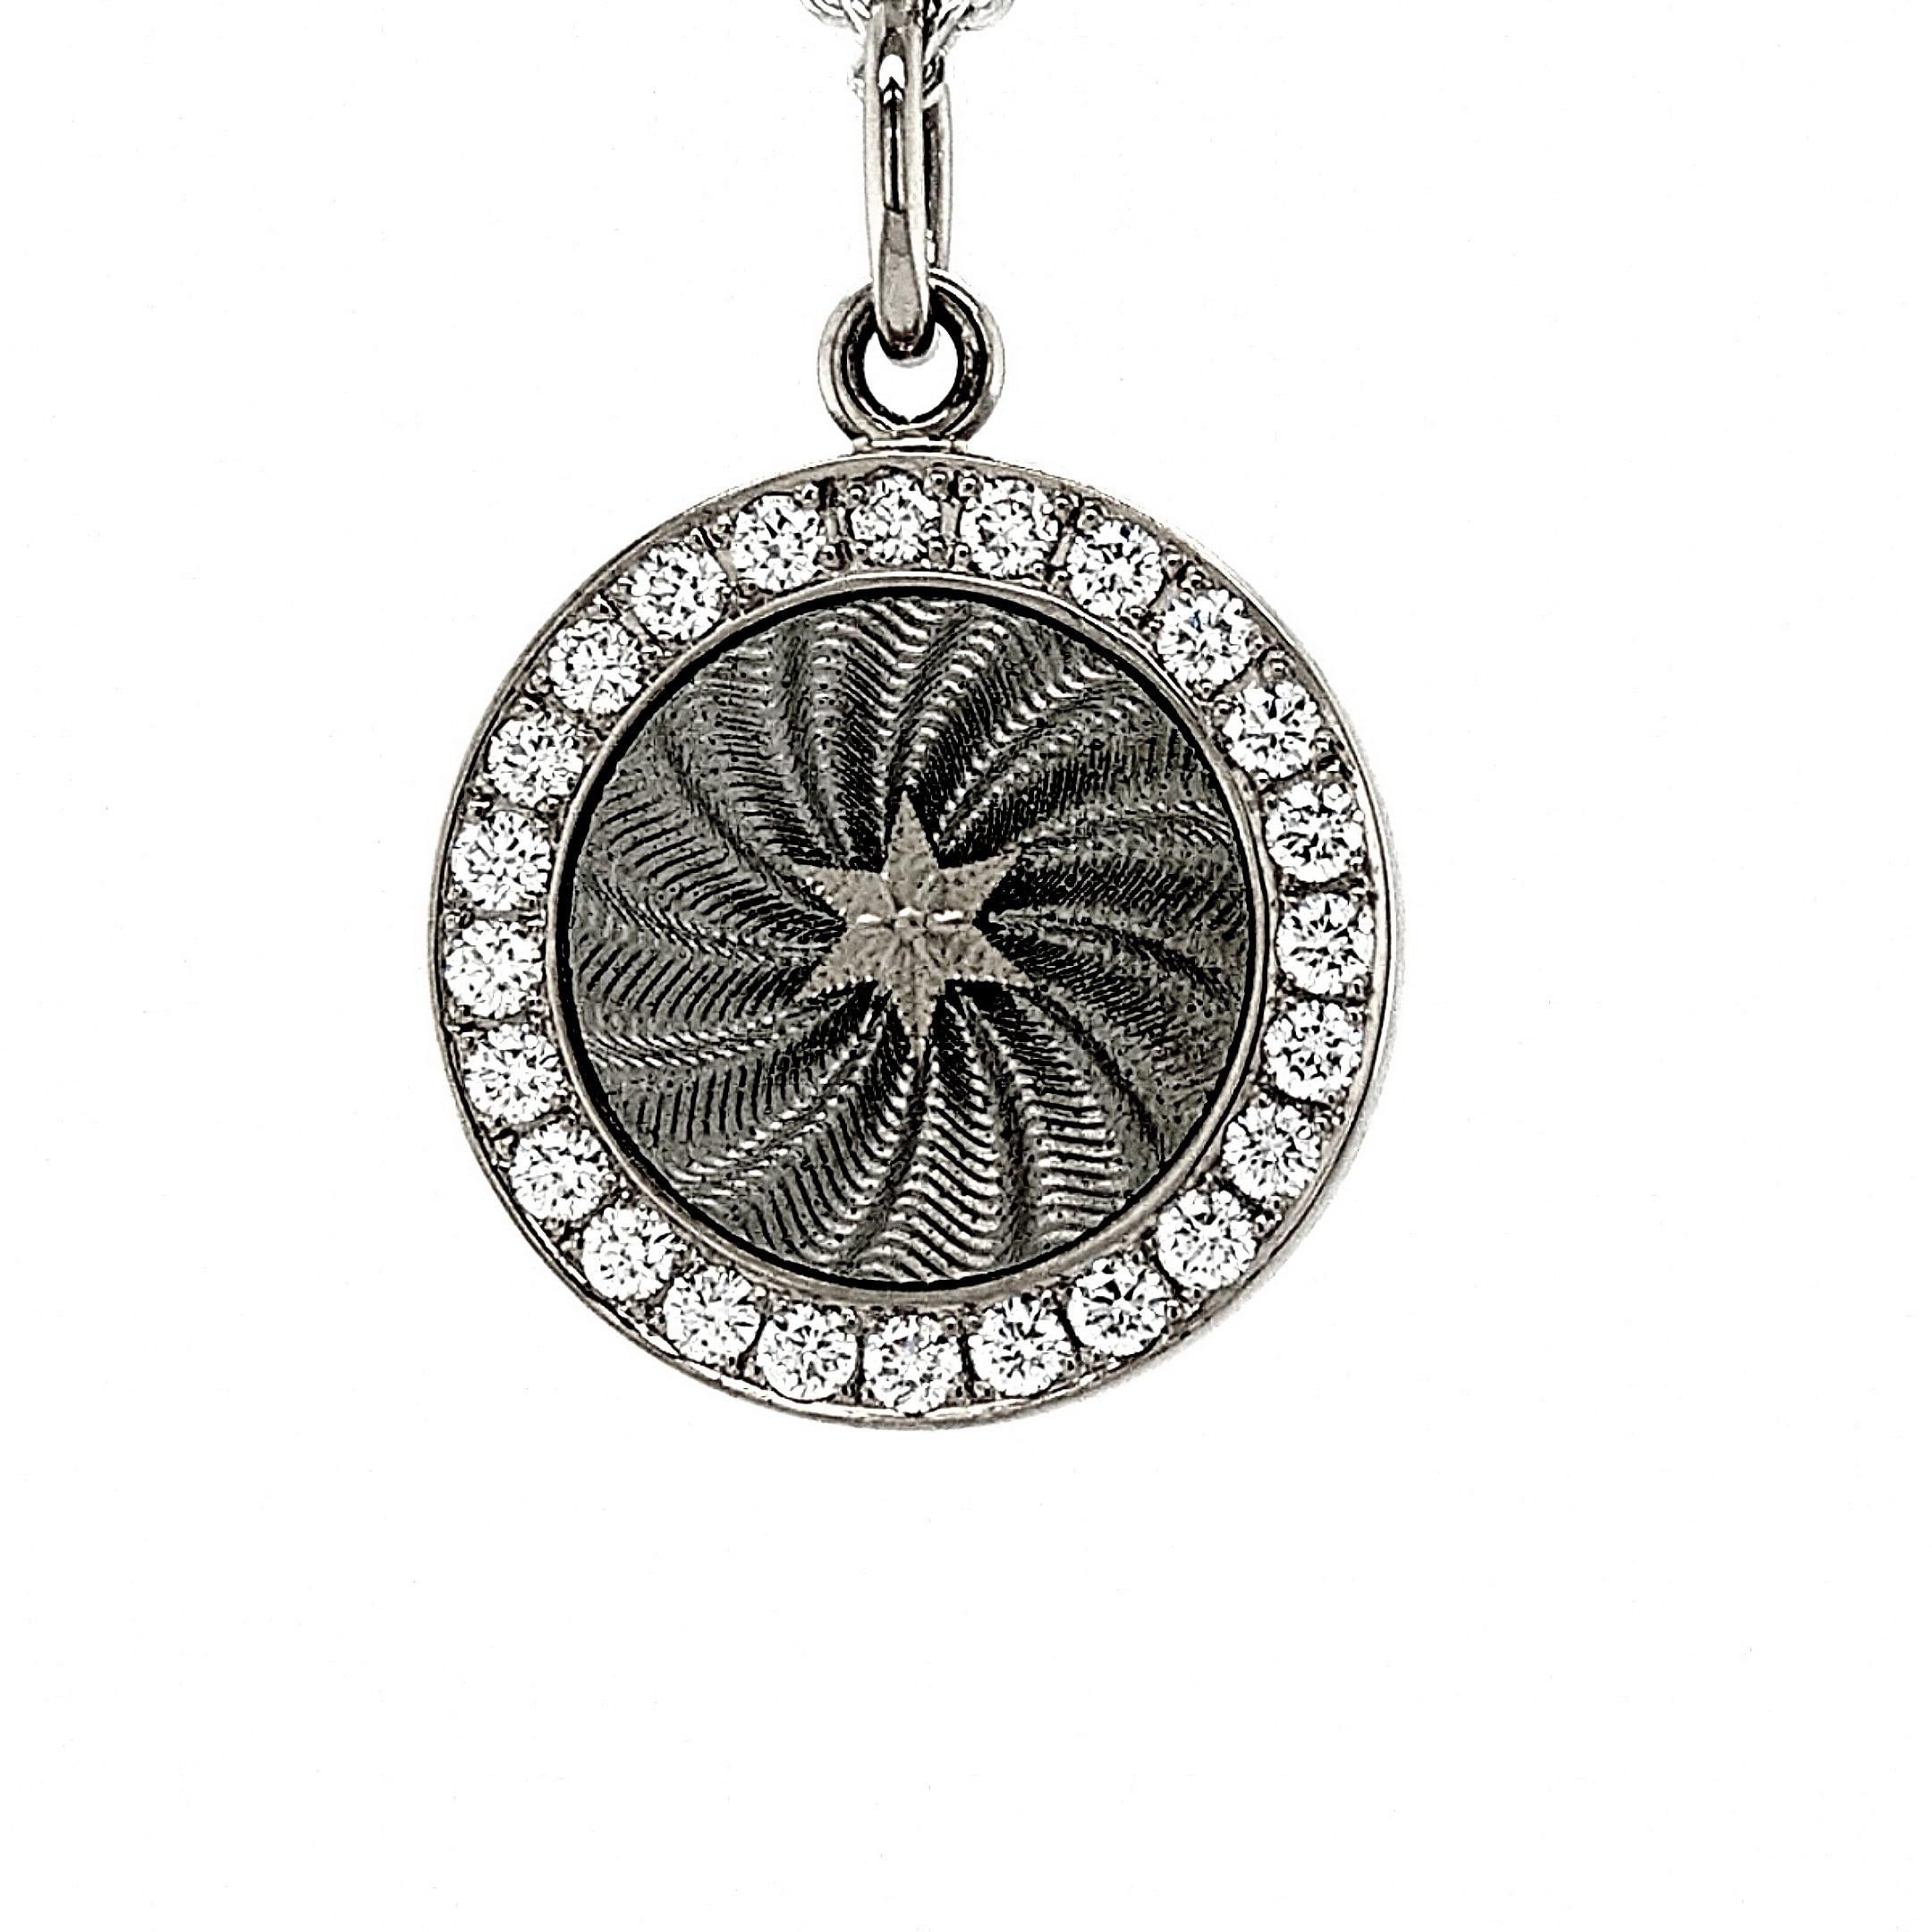 Victor Mayer round disc pendant necklace with star 18k white gold, Diskos Collection, translucent silver vitreous enamel, 24 diamonds, total 0.36 ct, G VS, diameter app. 15.0 mm

About the creator Victor Mayer
Victor Mayer is internationally